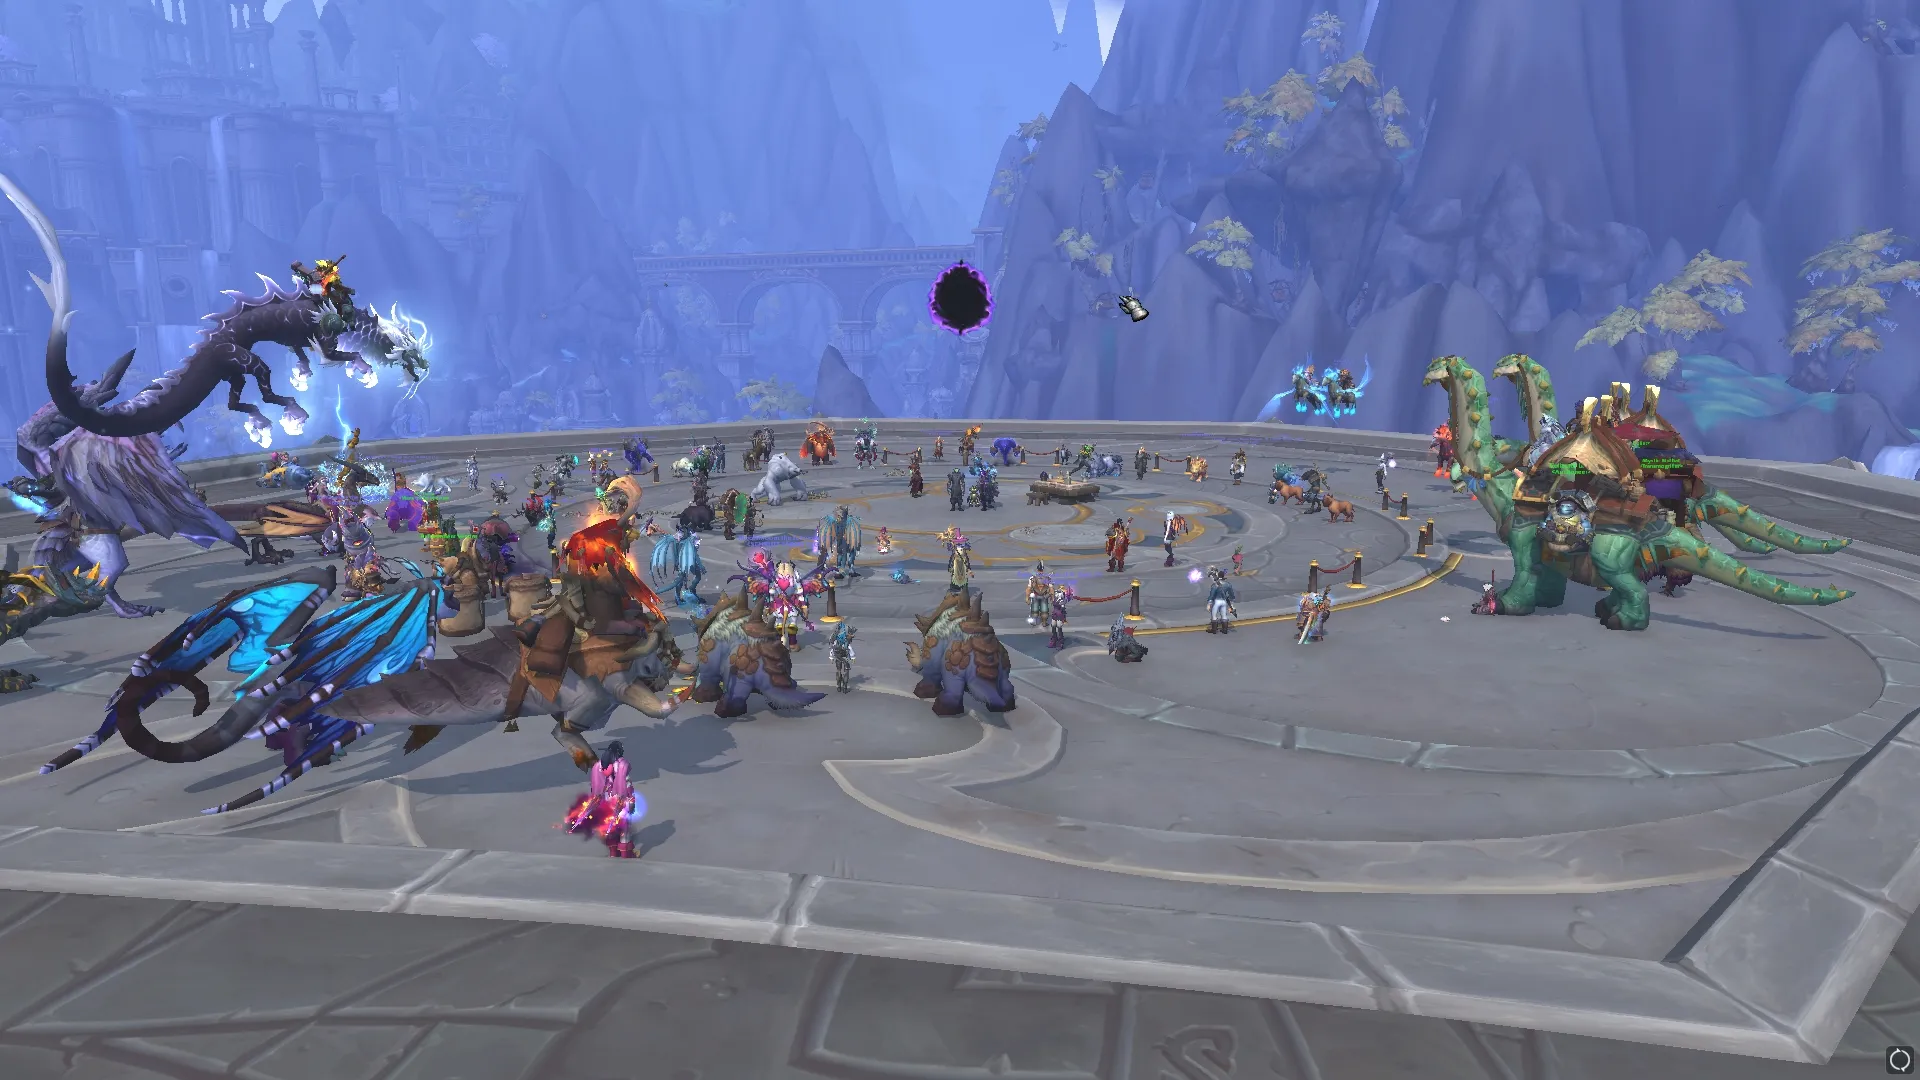 Players gathered around an emerging portal for the Hearthstone Event in World of Warcraft.